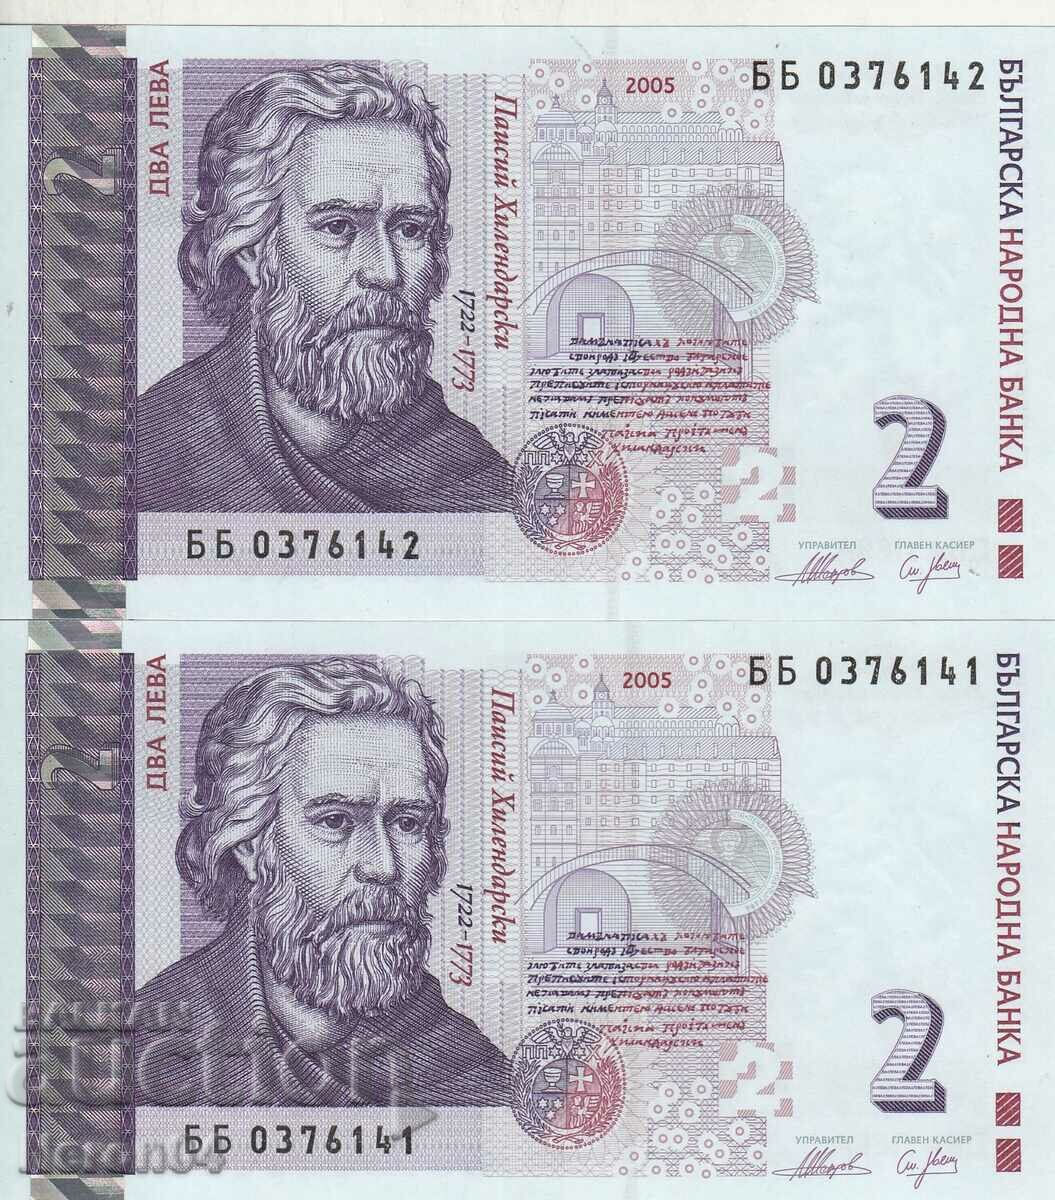 2 banknotes of 2 BGN each (sequential numbers) 2005, Bulgaria